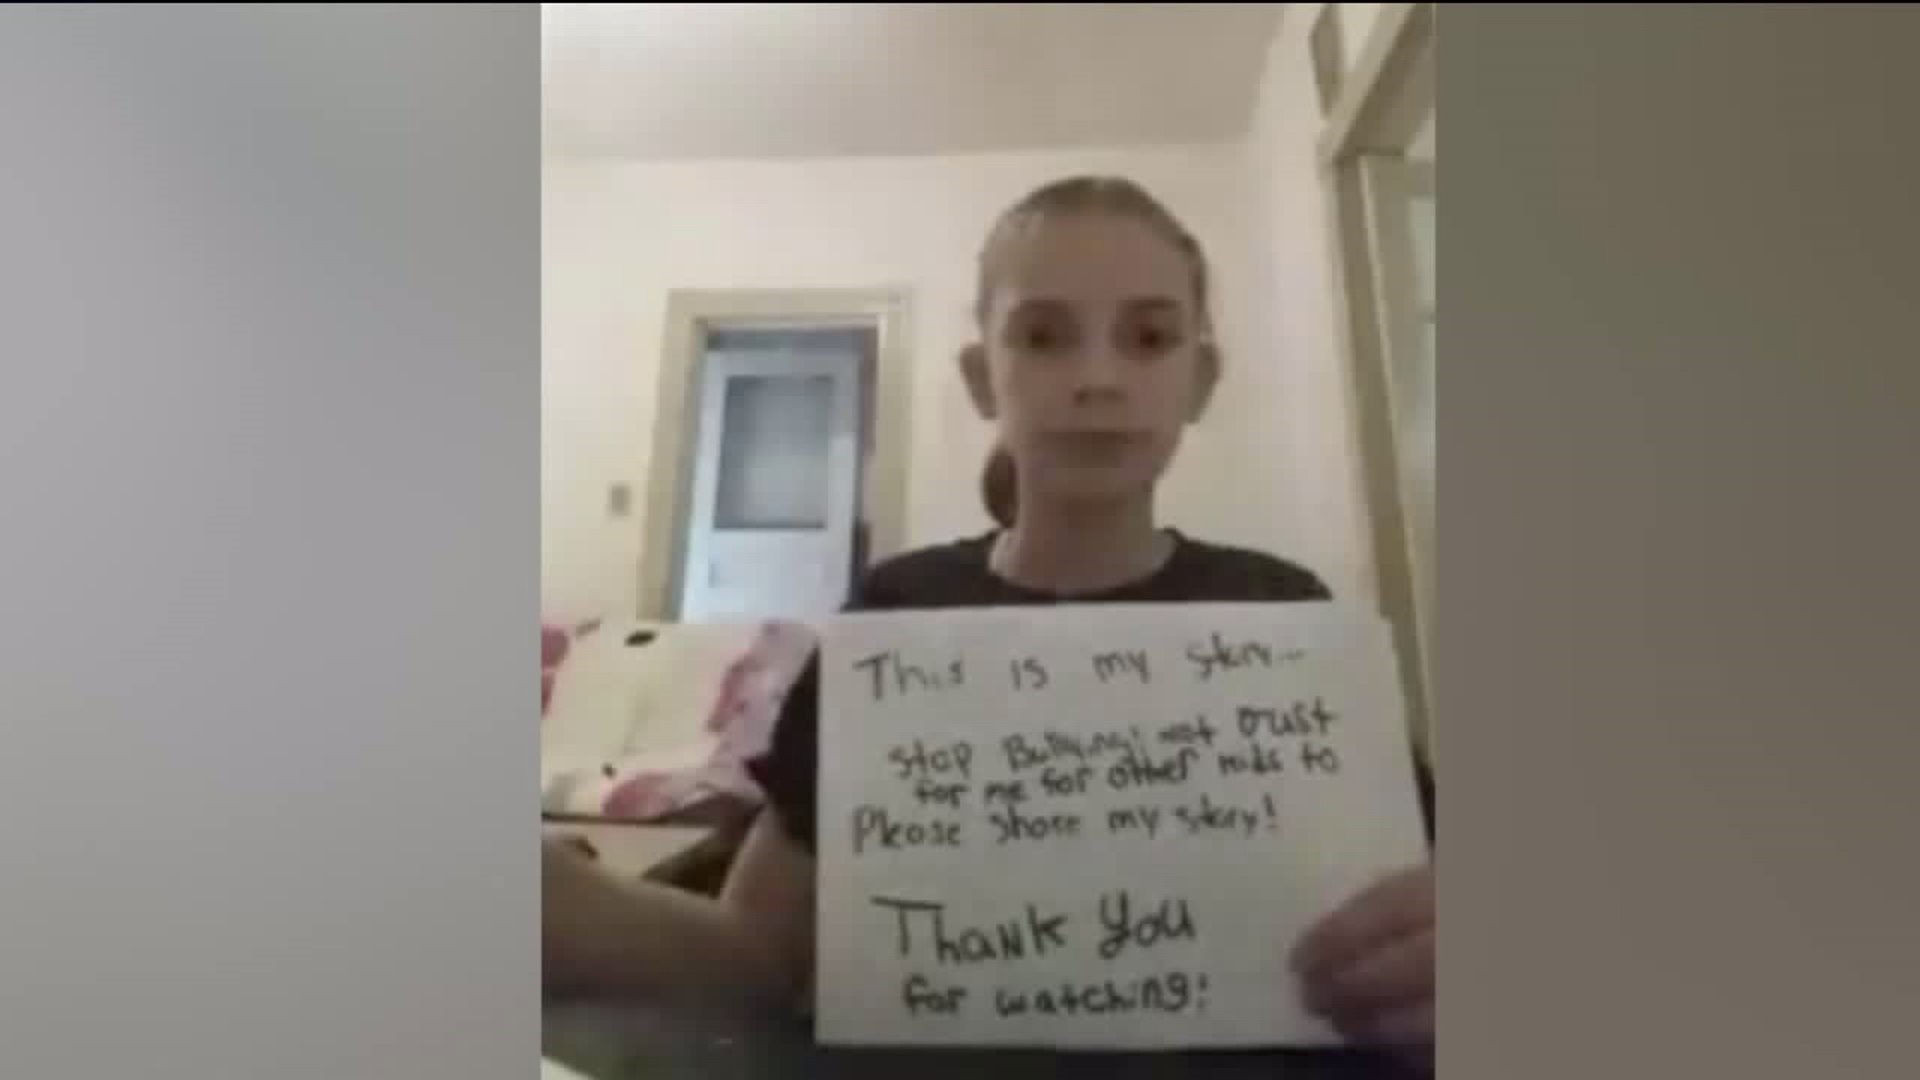 School District Meets With Father of Bullied Fourth-grader After She Posts Video About Harassment at School